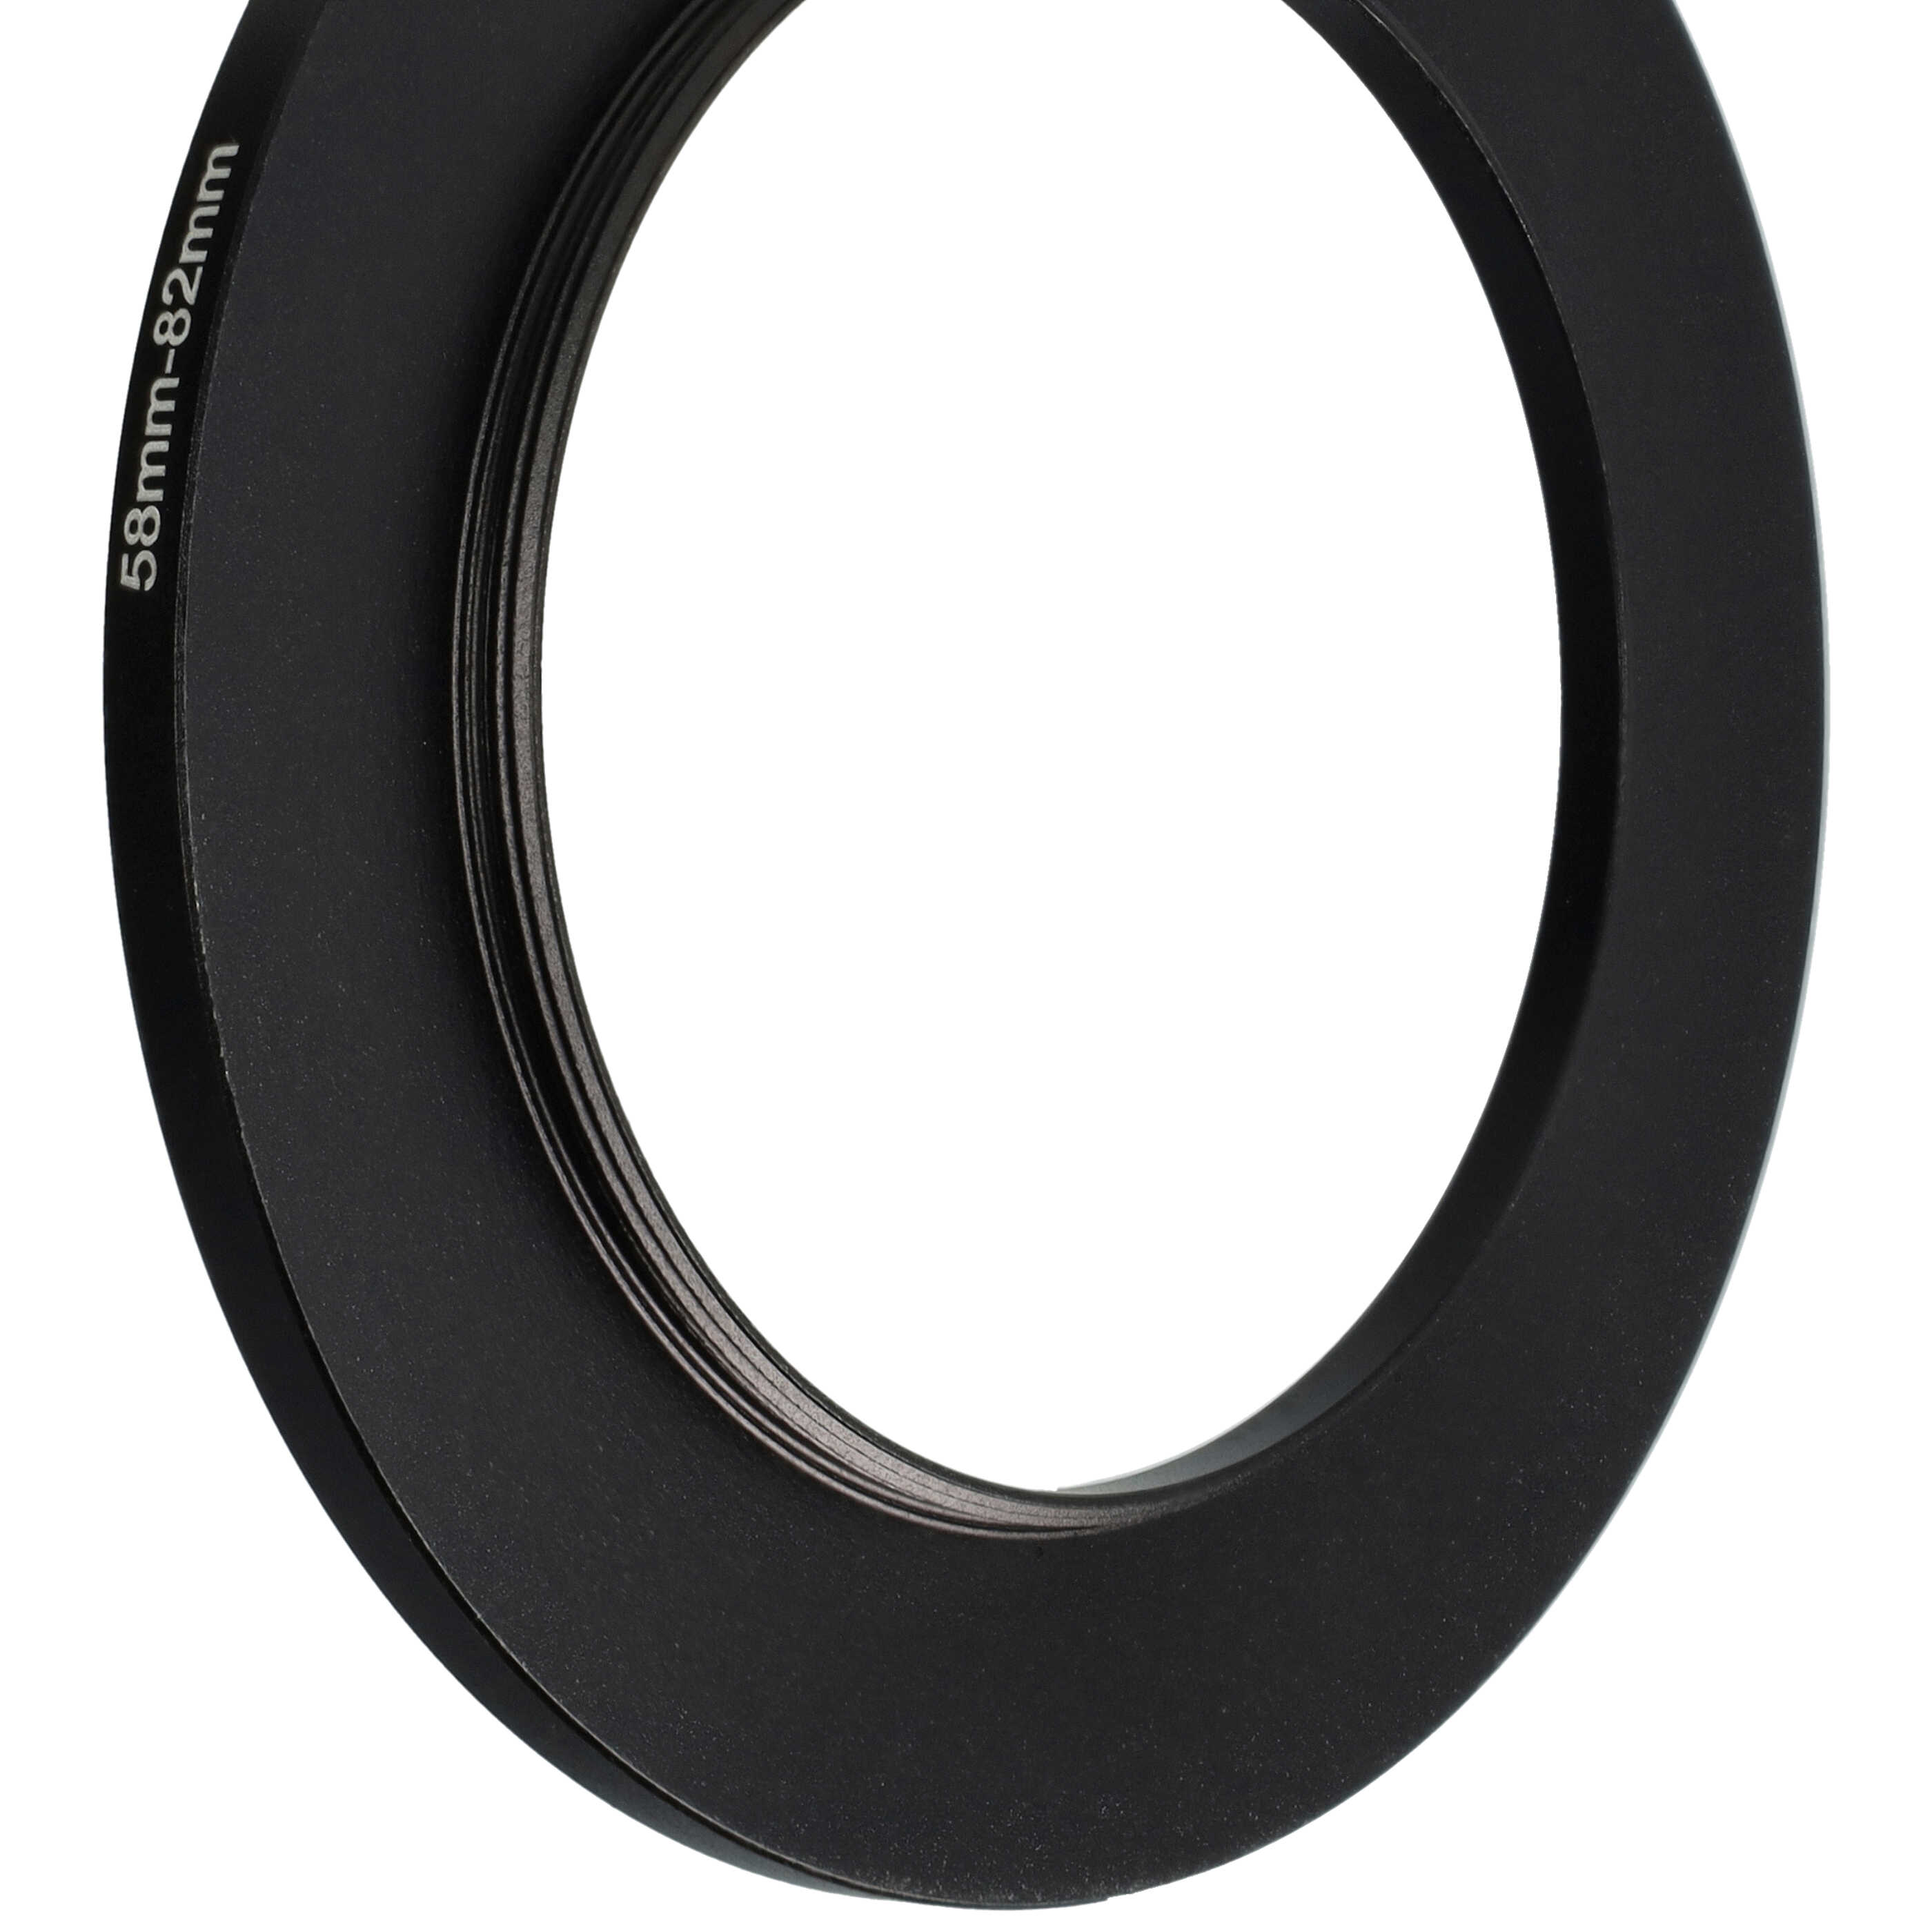 Step-Up Ring Adapter of 58 mm to 82 mmfor various Camera Lens - Filter Adapter